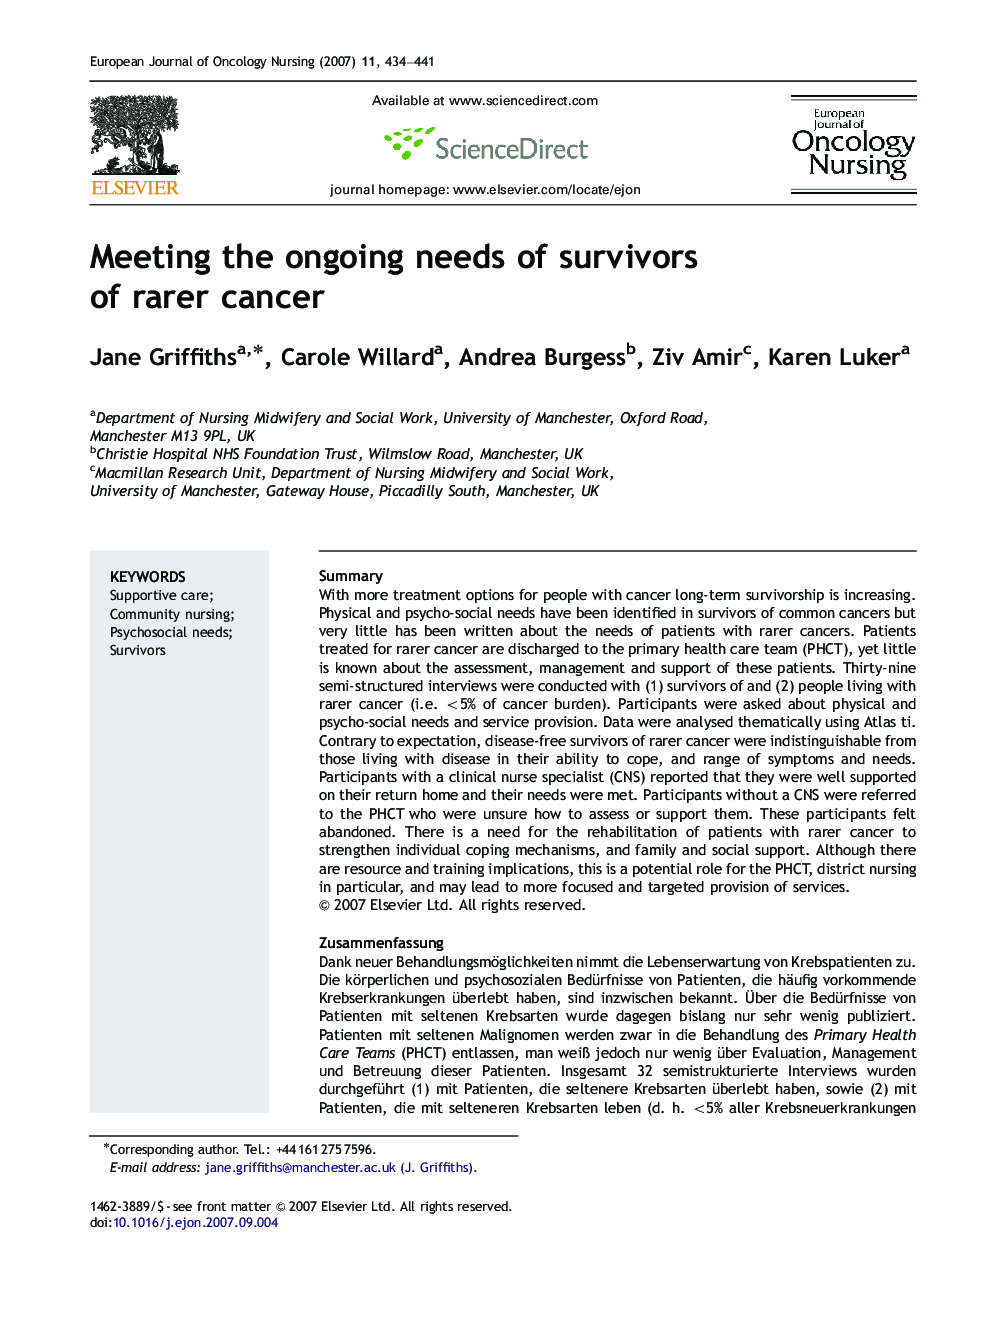 Meeting the ongoing needs of survivors of rarer cancer